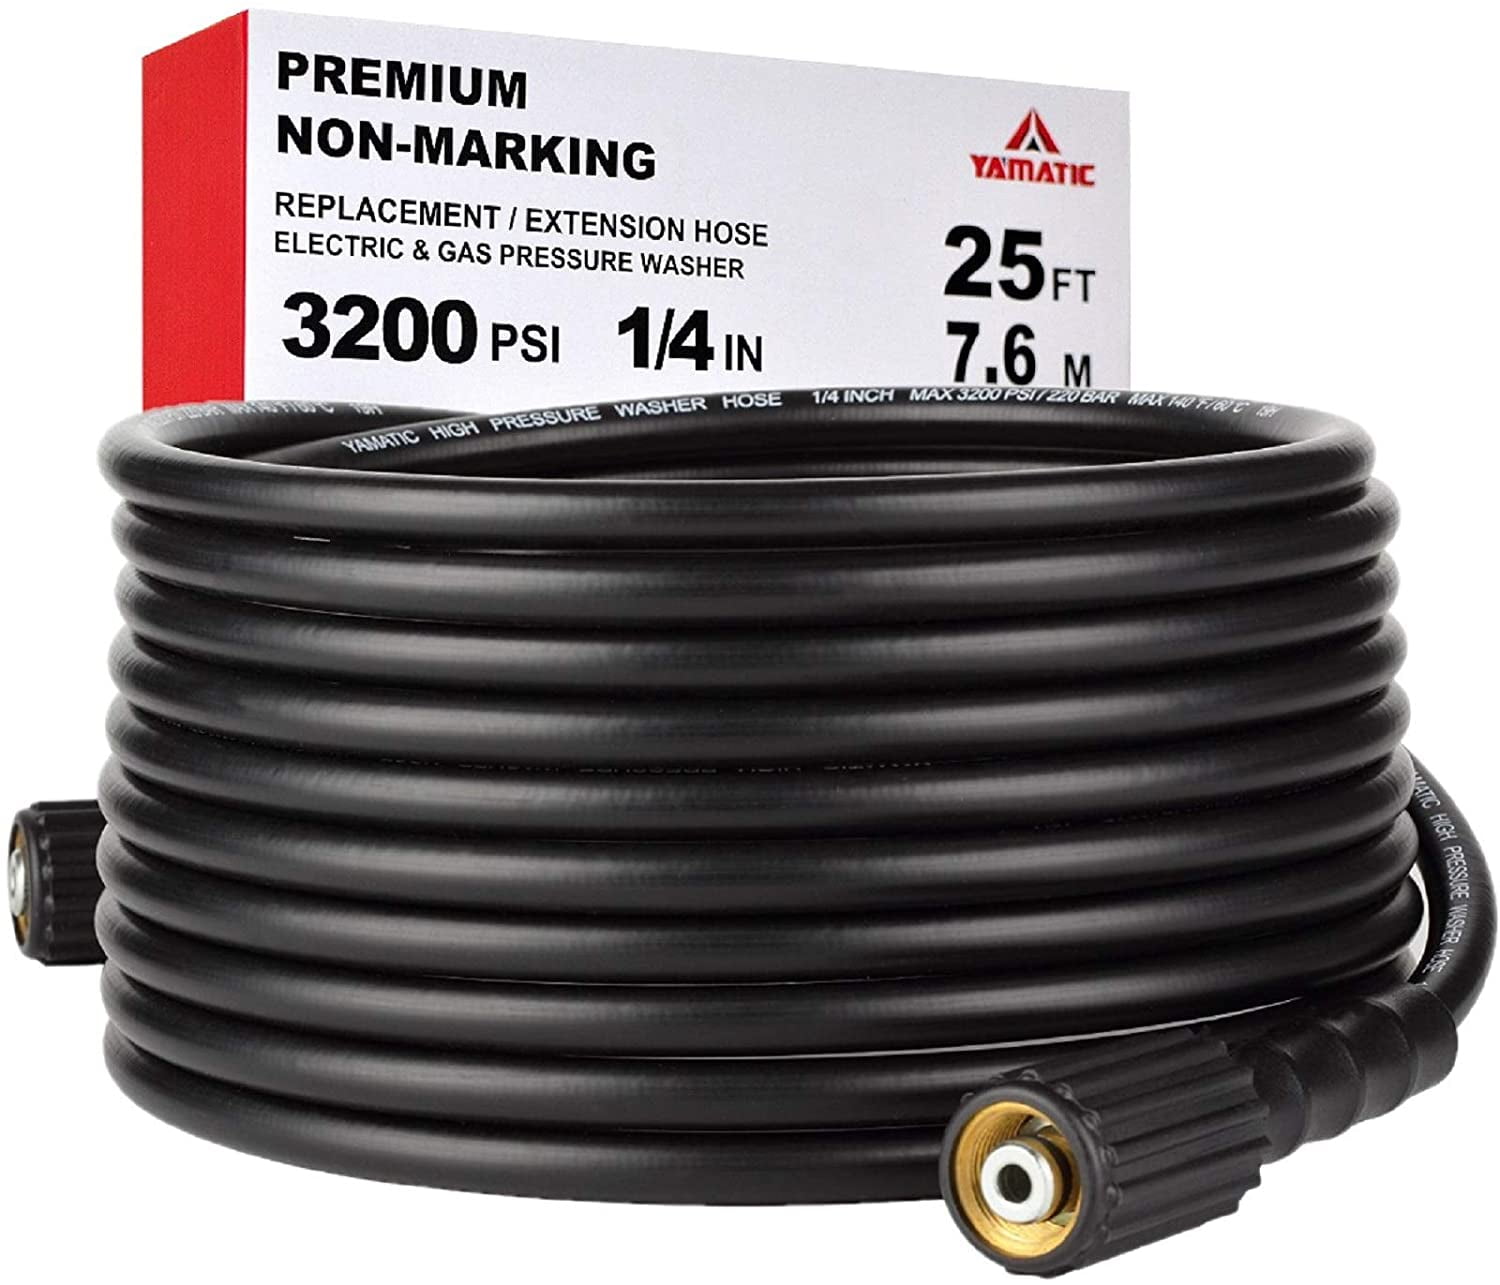 25 FT High Pressure Washer Hose Replacement 3000PSI w/ M22 Threaded Connectors 